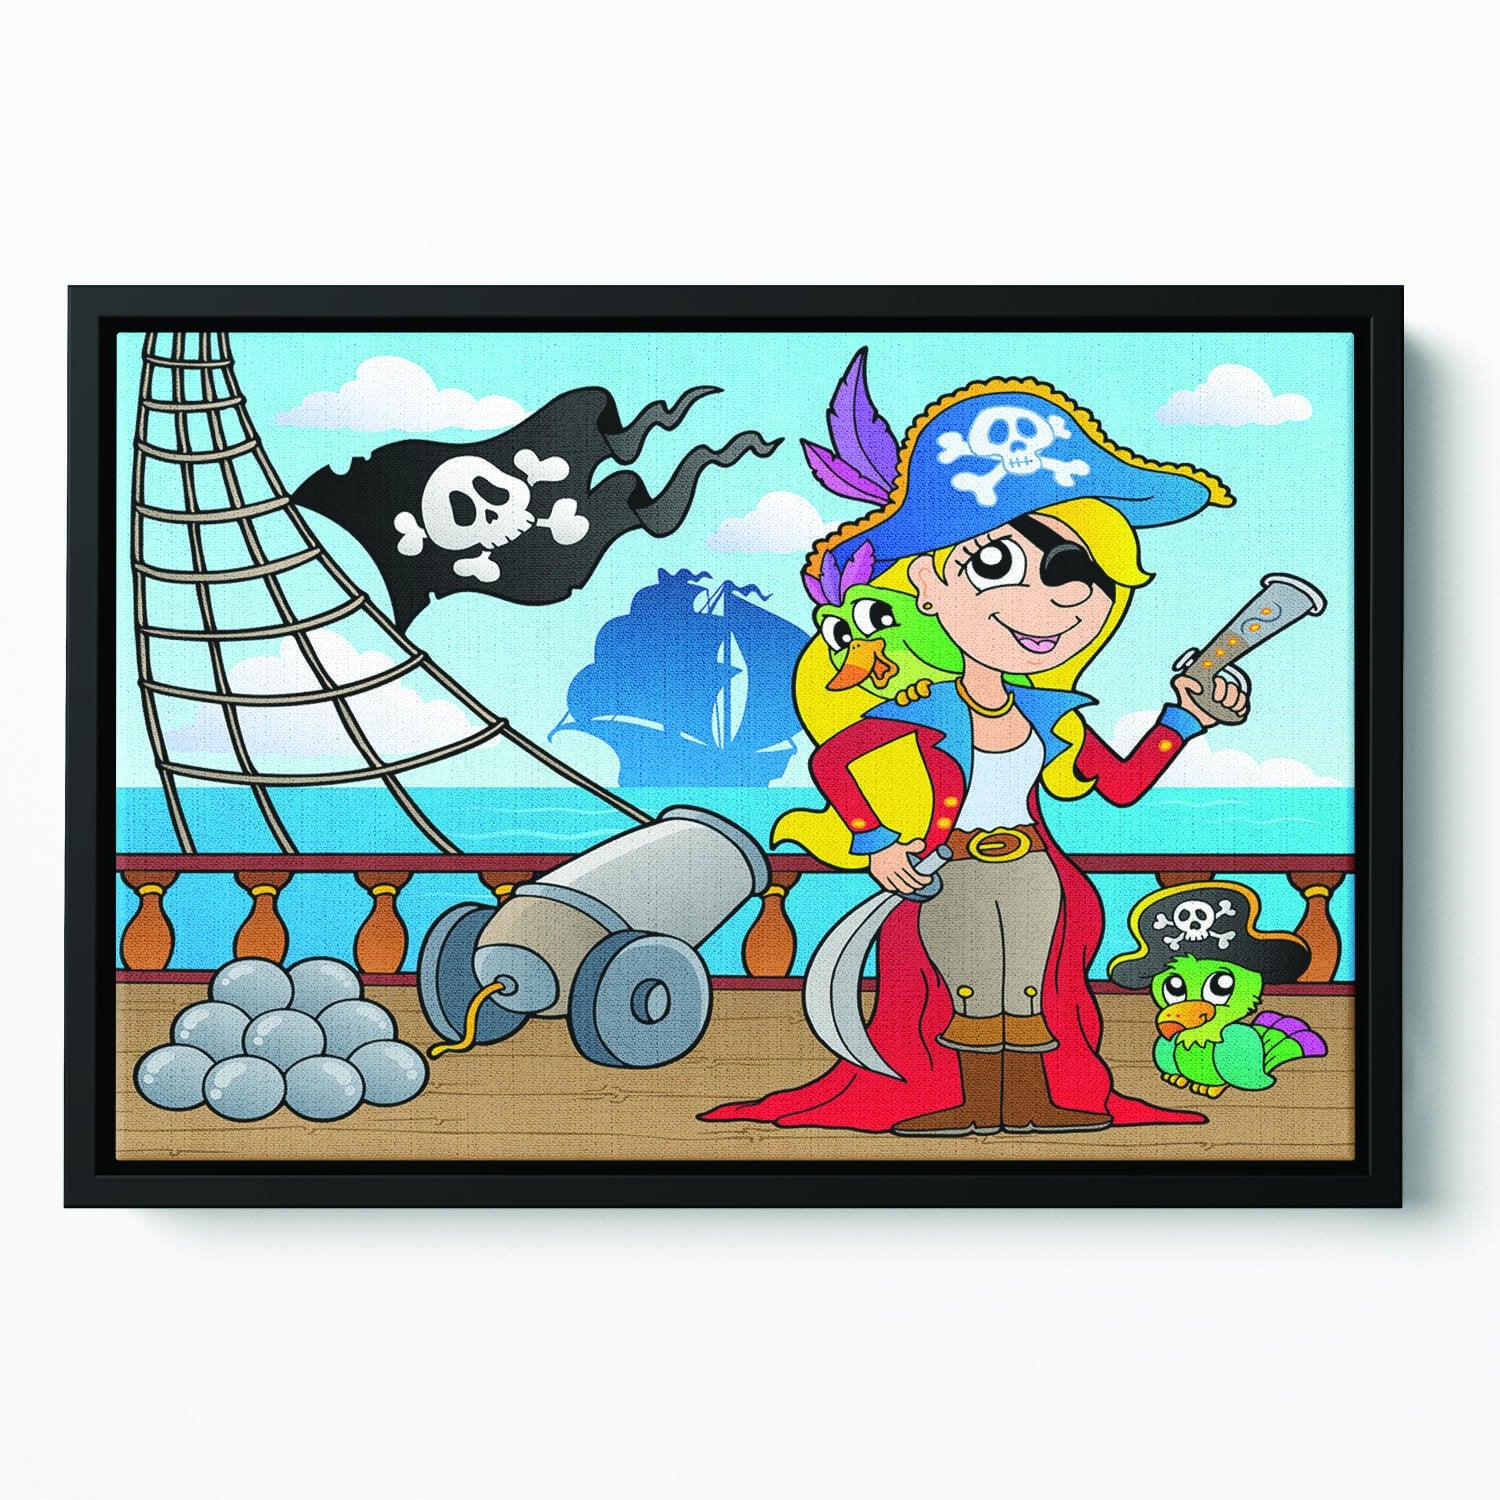 Pirate ship deck theme 9 Floating Framed Canvas